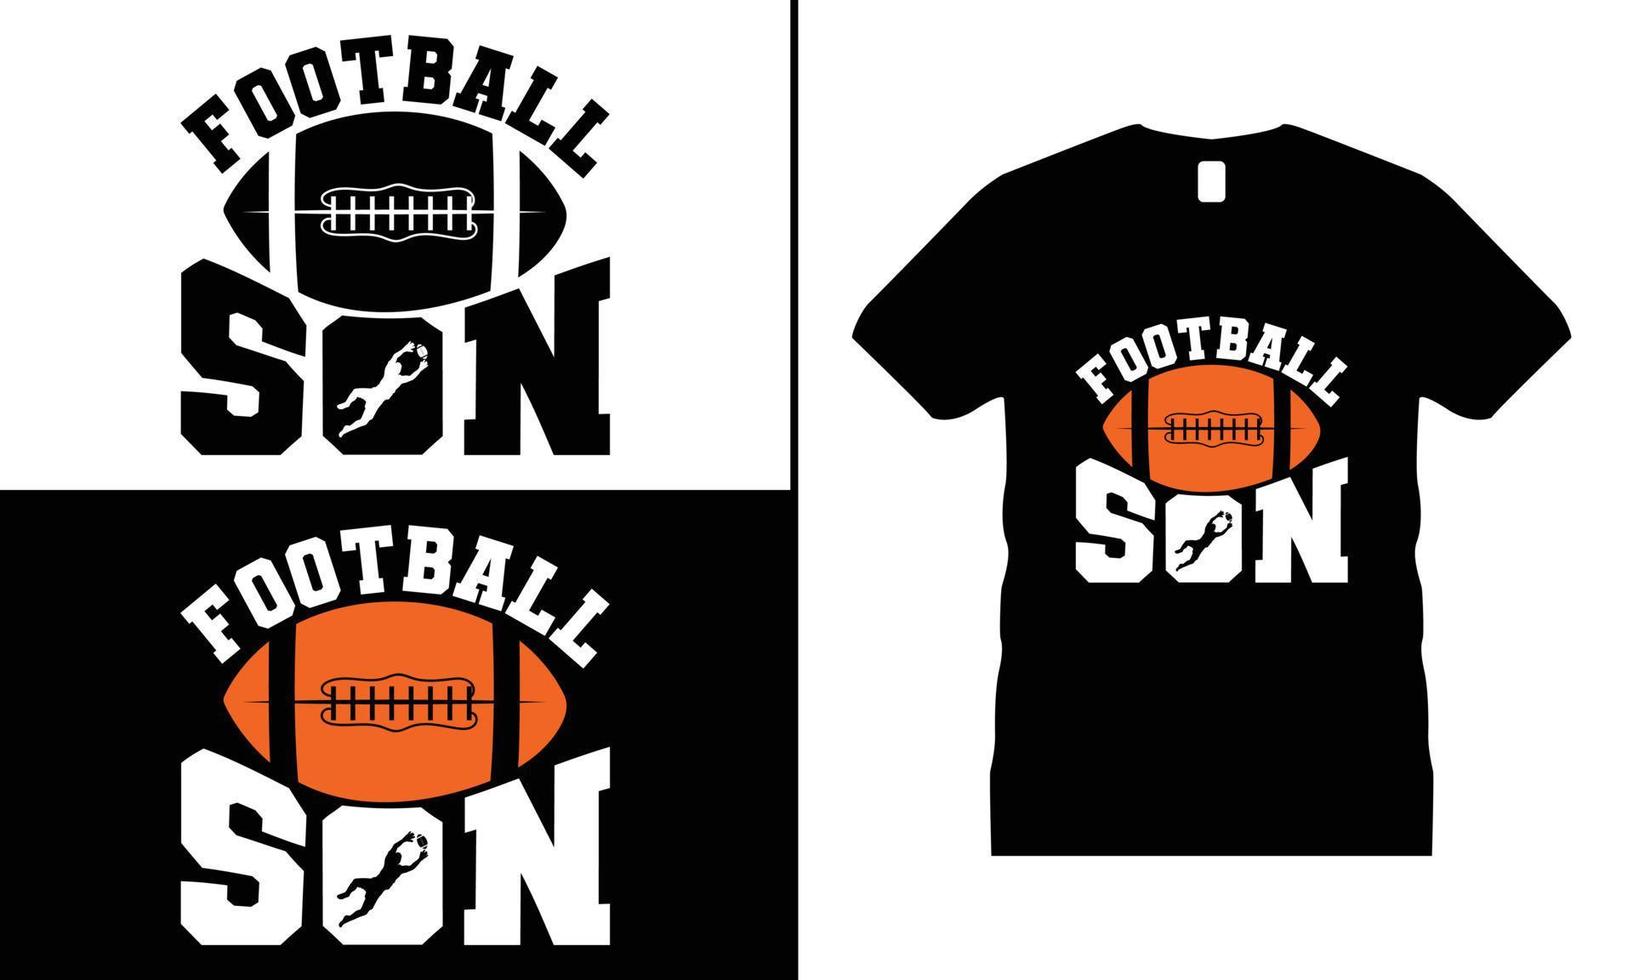 American Football Sports Motivational T-shirt Design vector. Use for T-Shirt, mugs, stickers, etc. vector